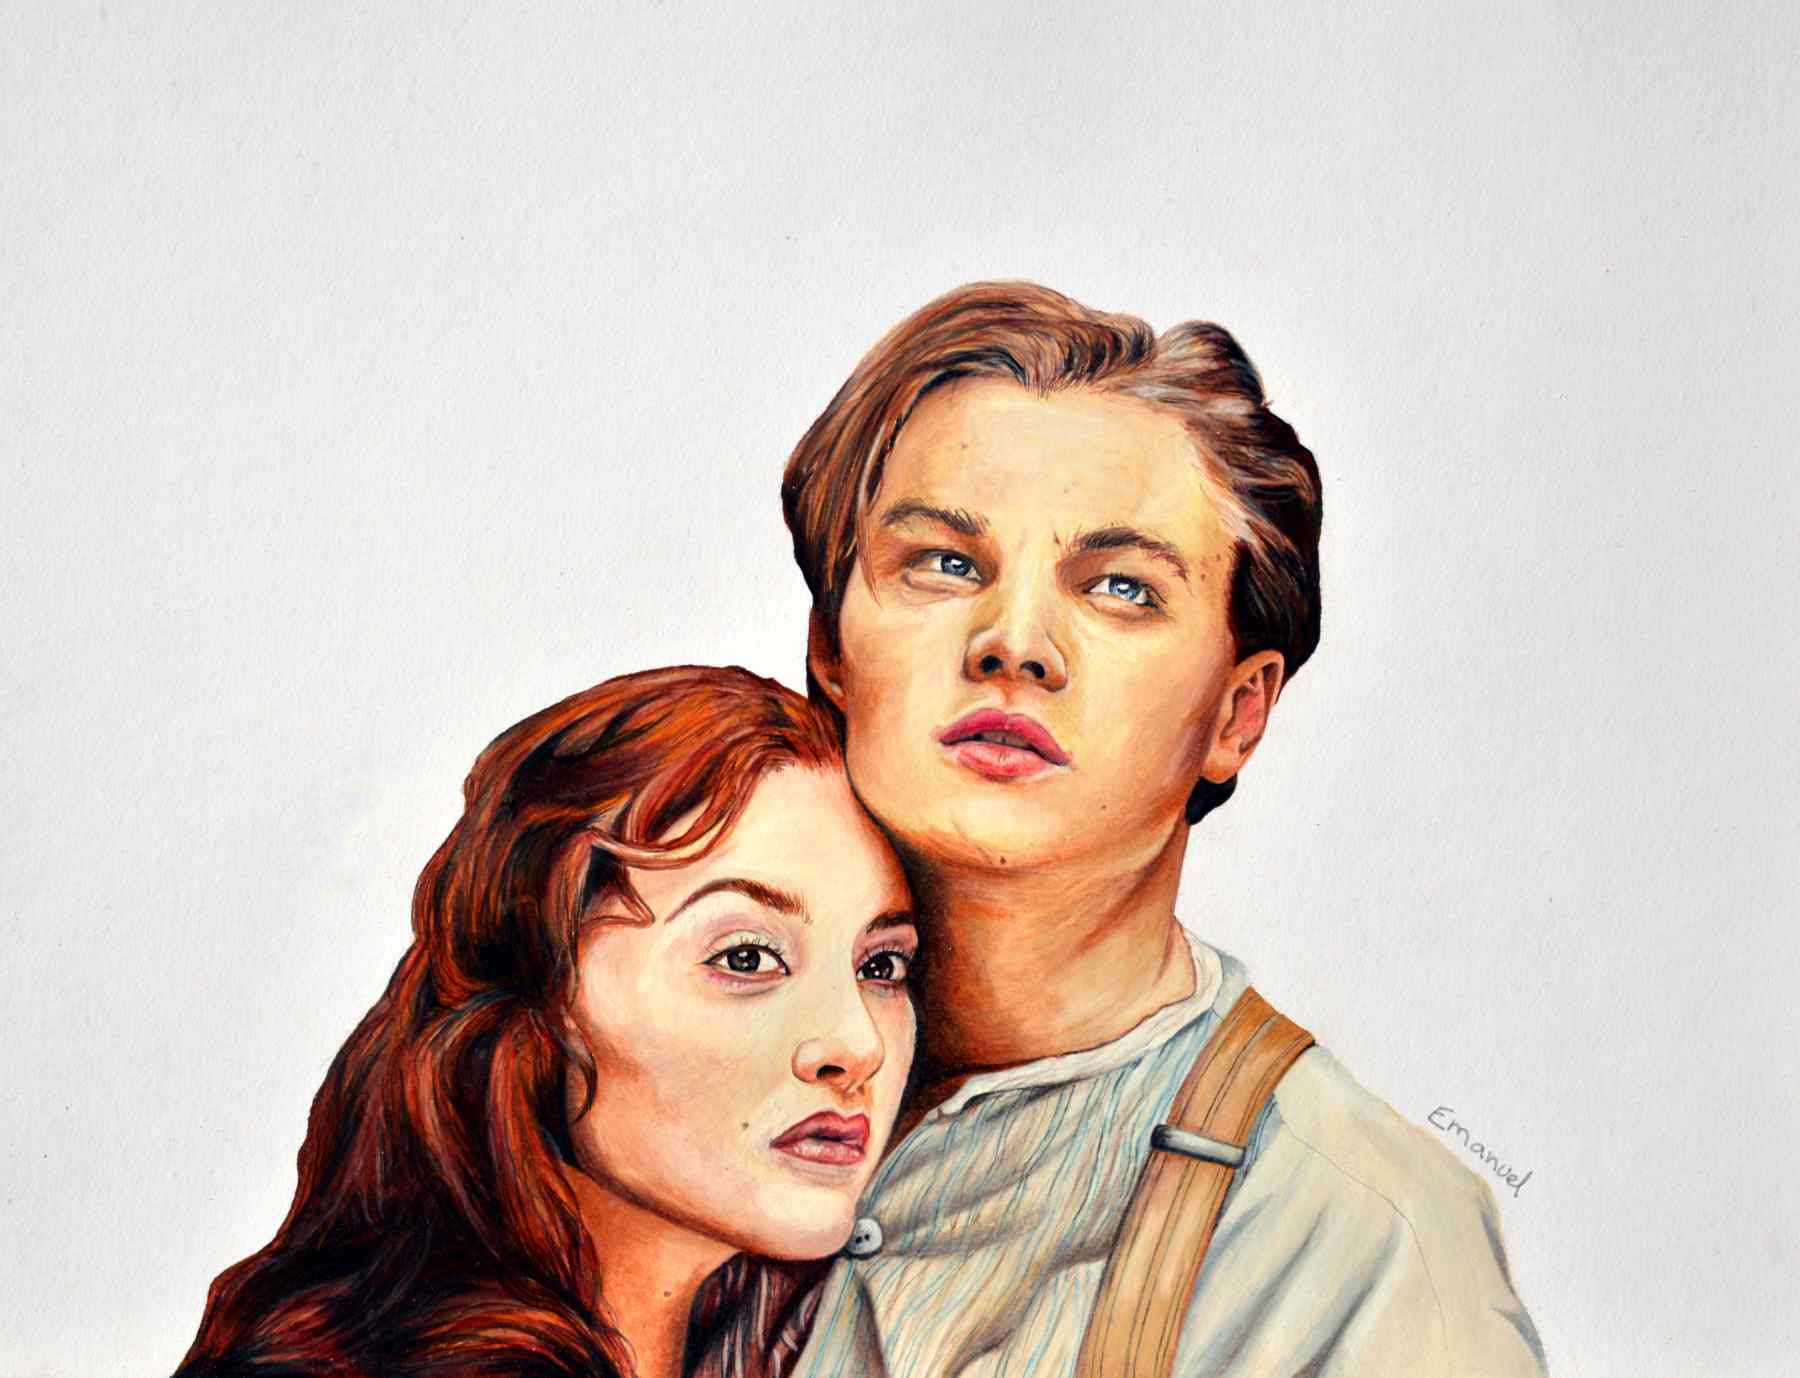 I painted this portrait of Rose from the Titanic movie. : r/titanic